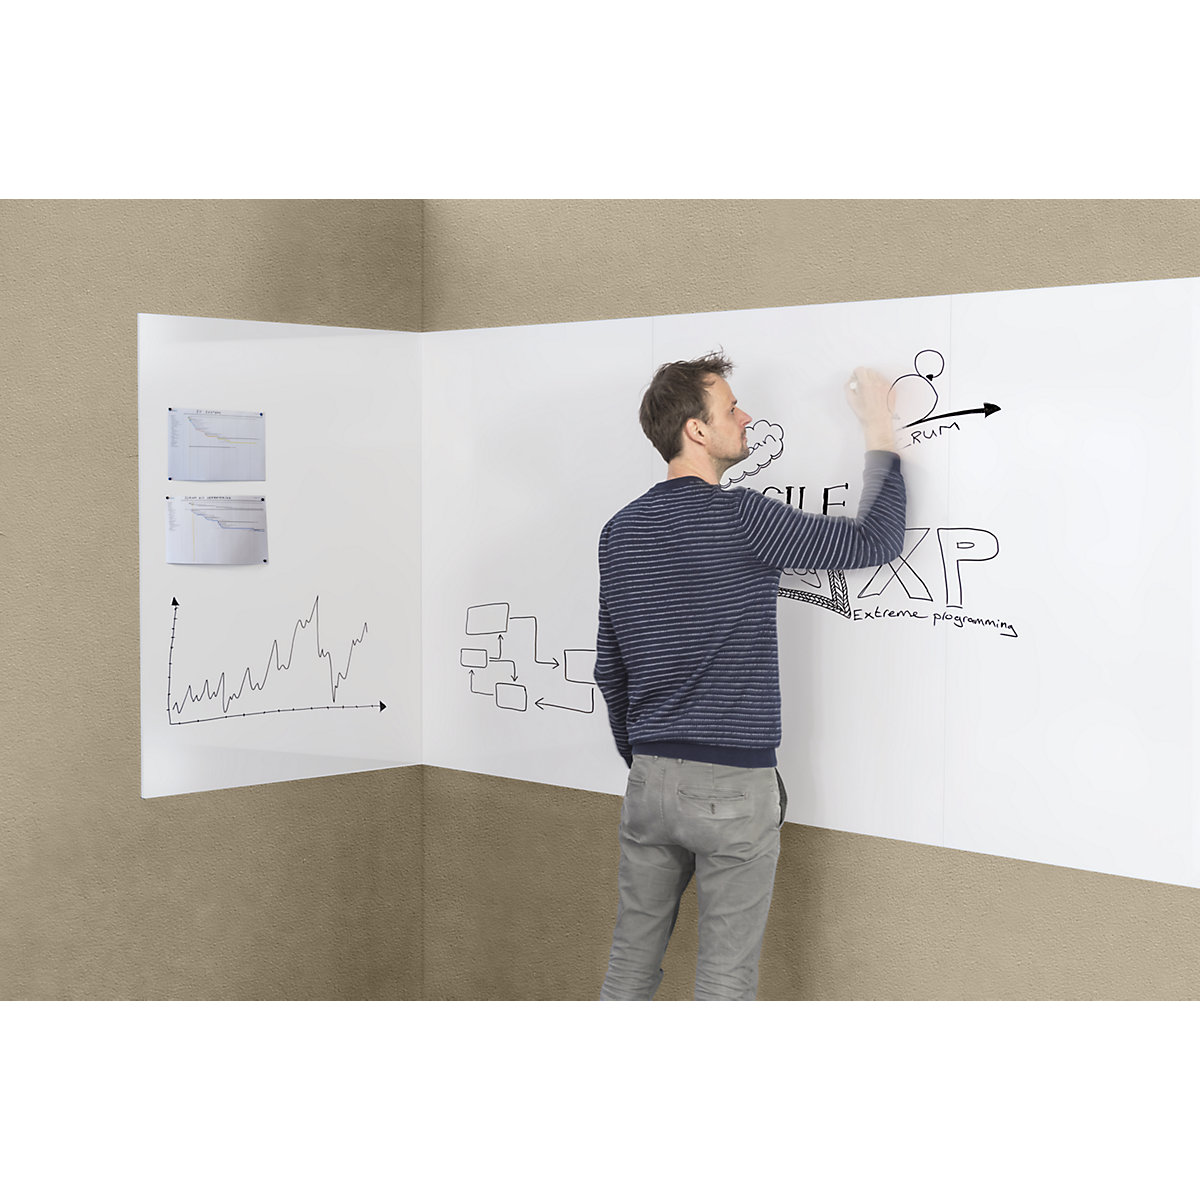 Buy Whiteboard paint that comes with extream customer service